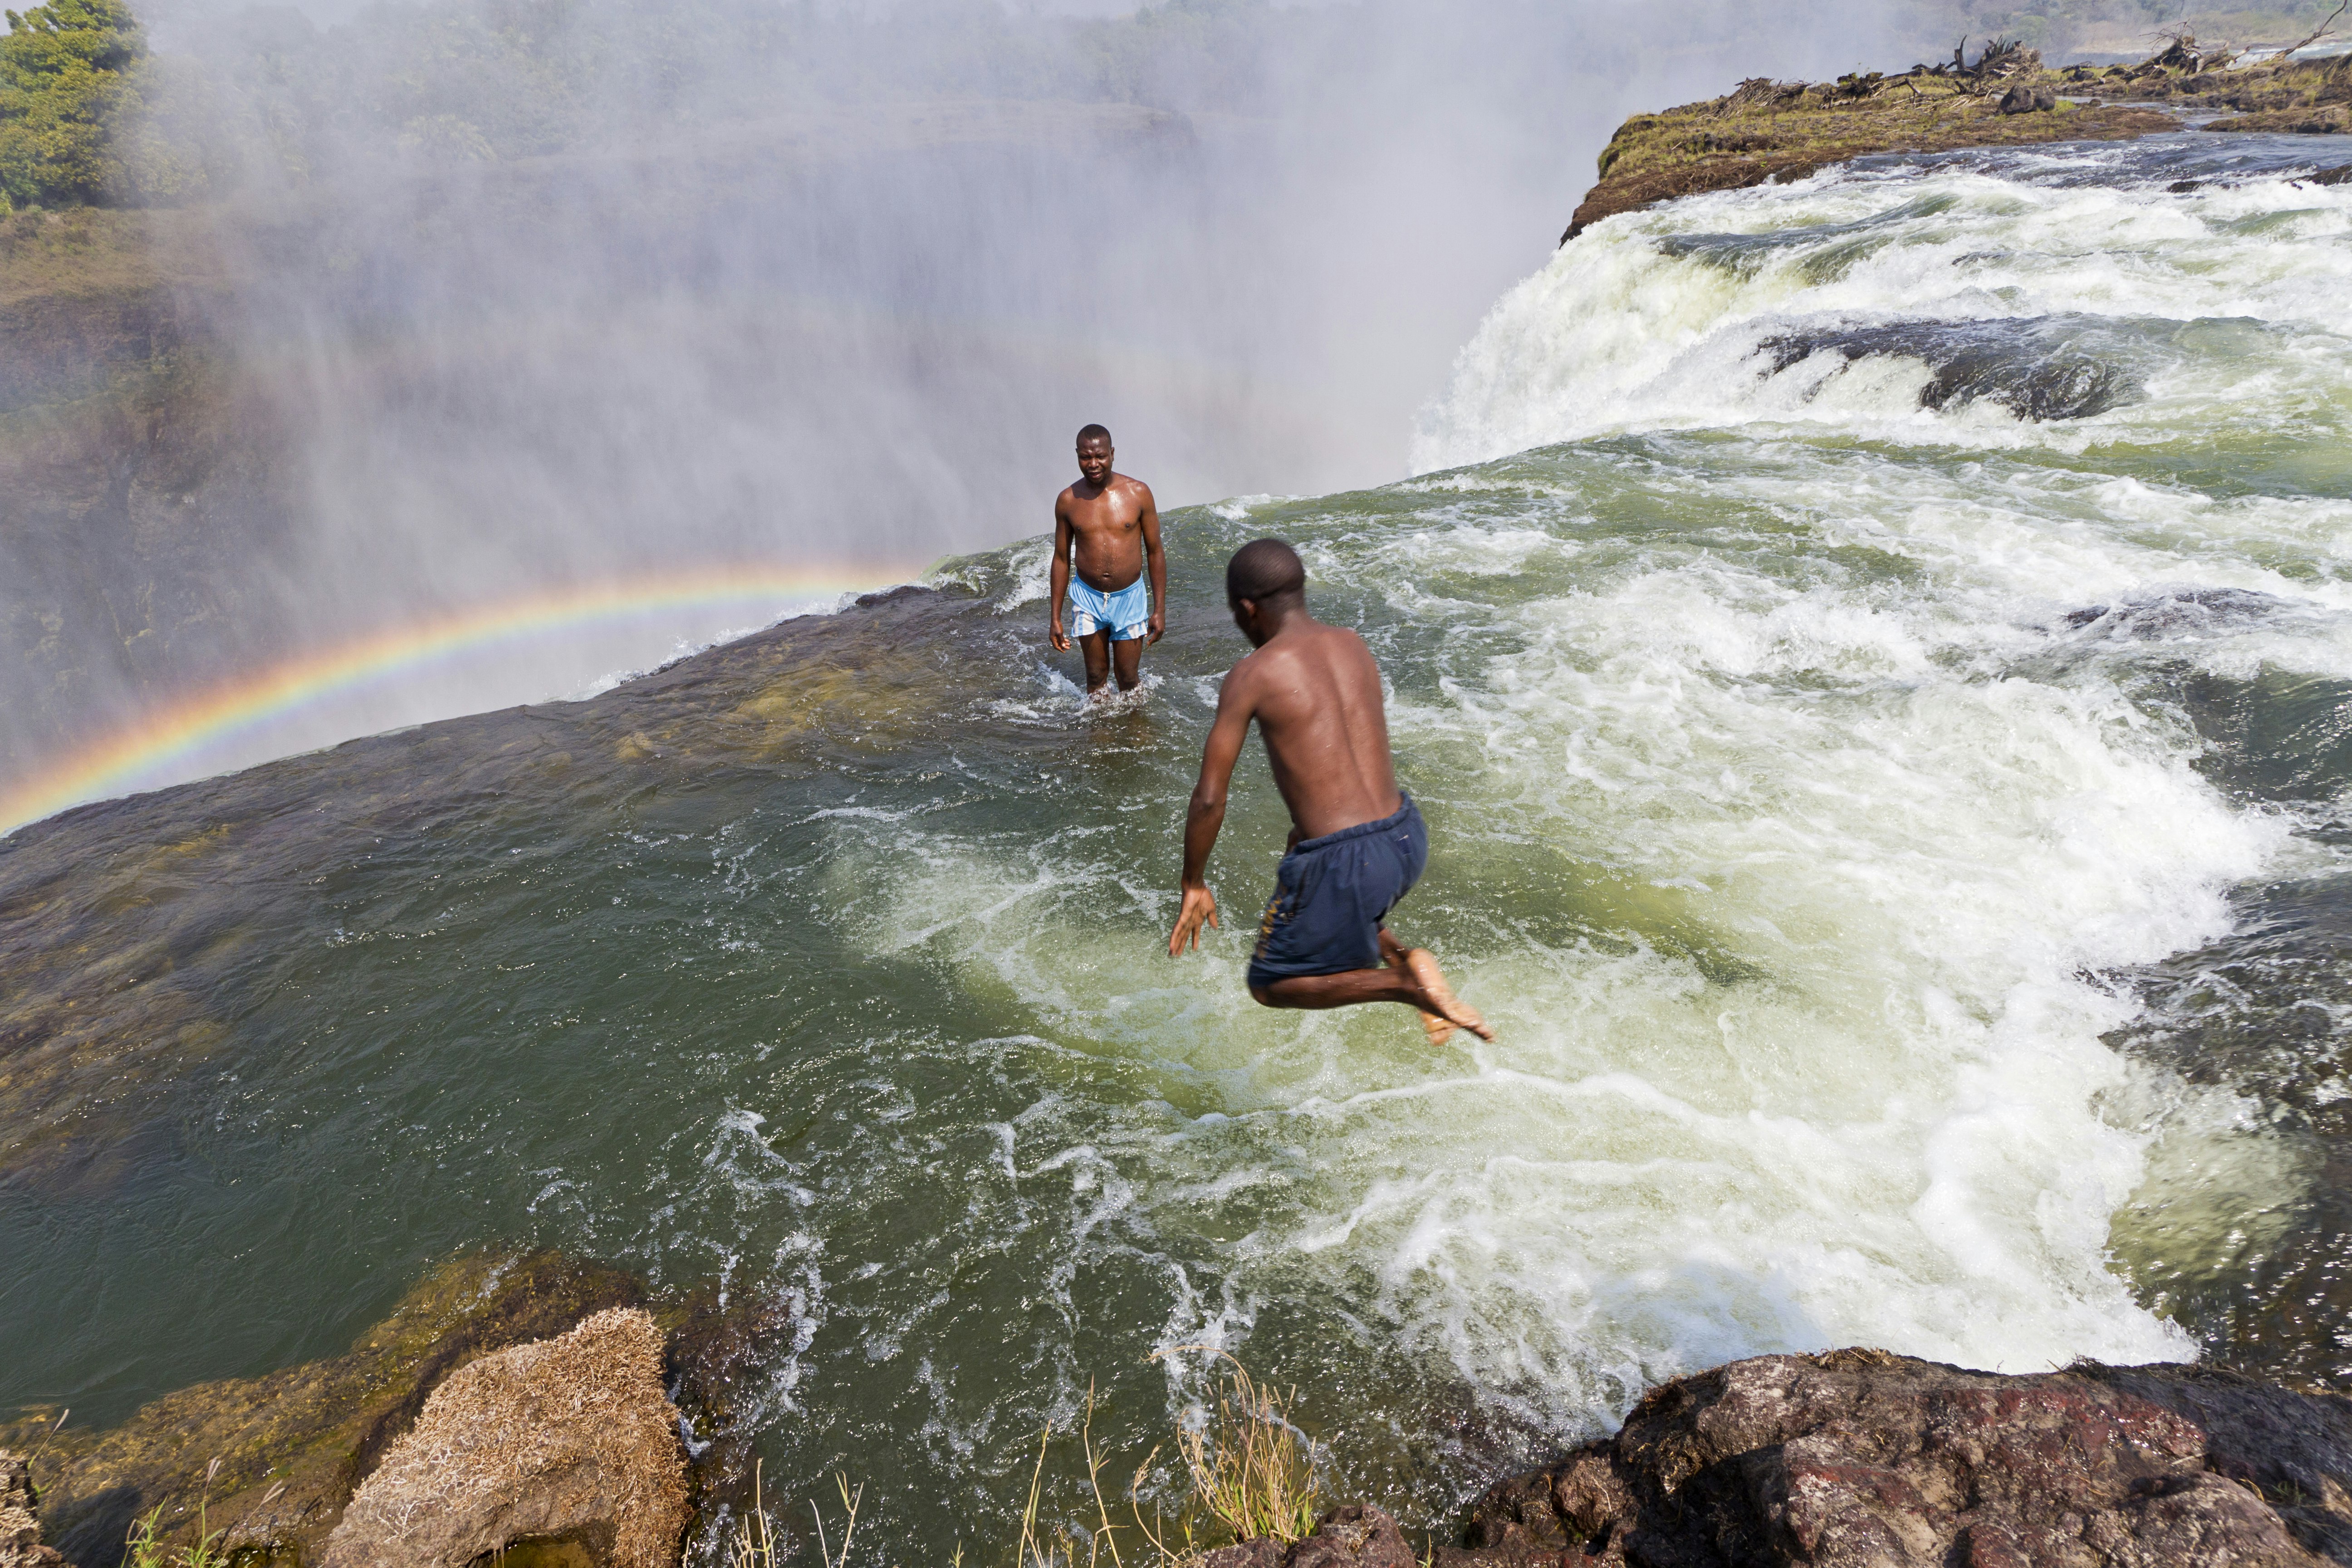 Two men in swim trunks enjoy Devil's Pool atop Victoria Falls, one standing close to the edge watching as the other jumps from a high point into the pool below with his back to the viewer